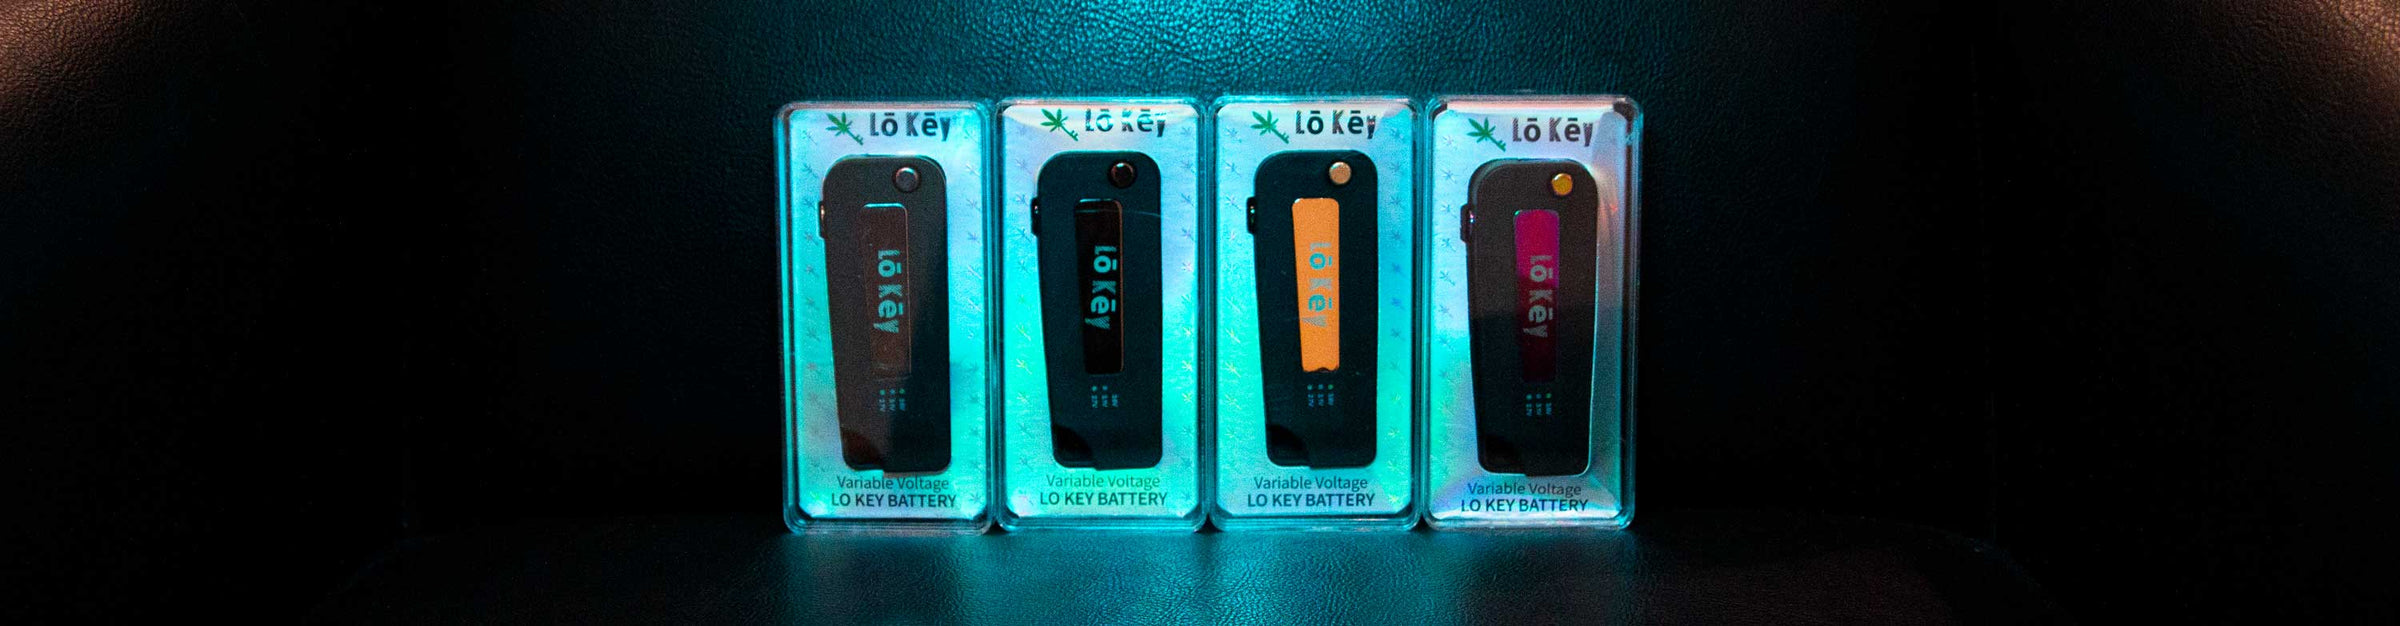 LoKey Vaporizers standing in black background with blue lighting.